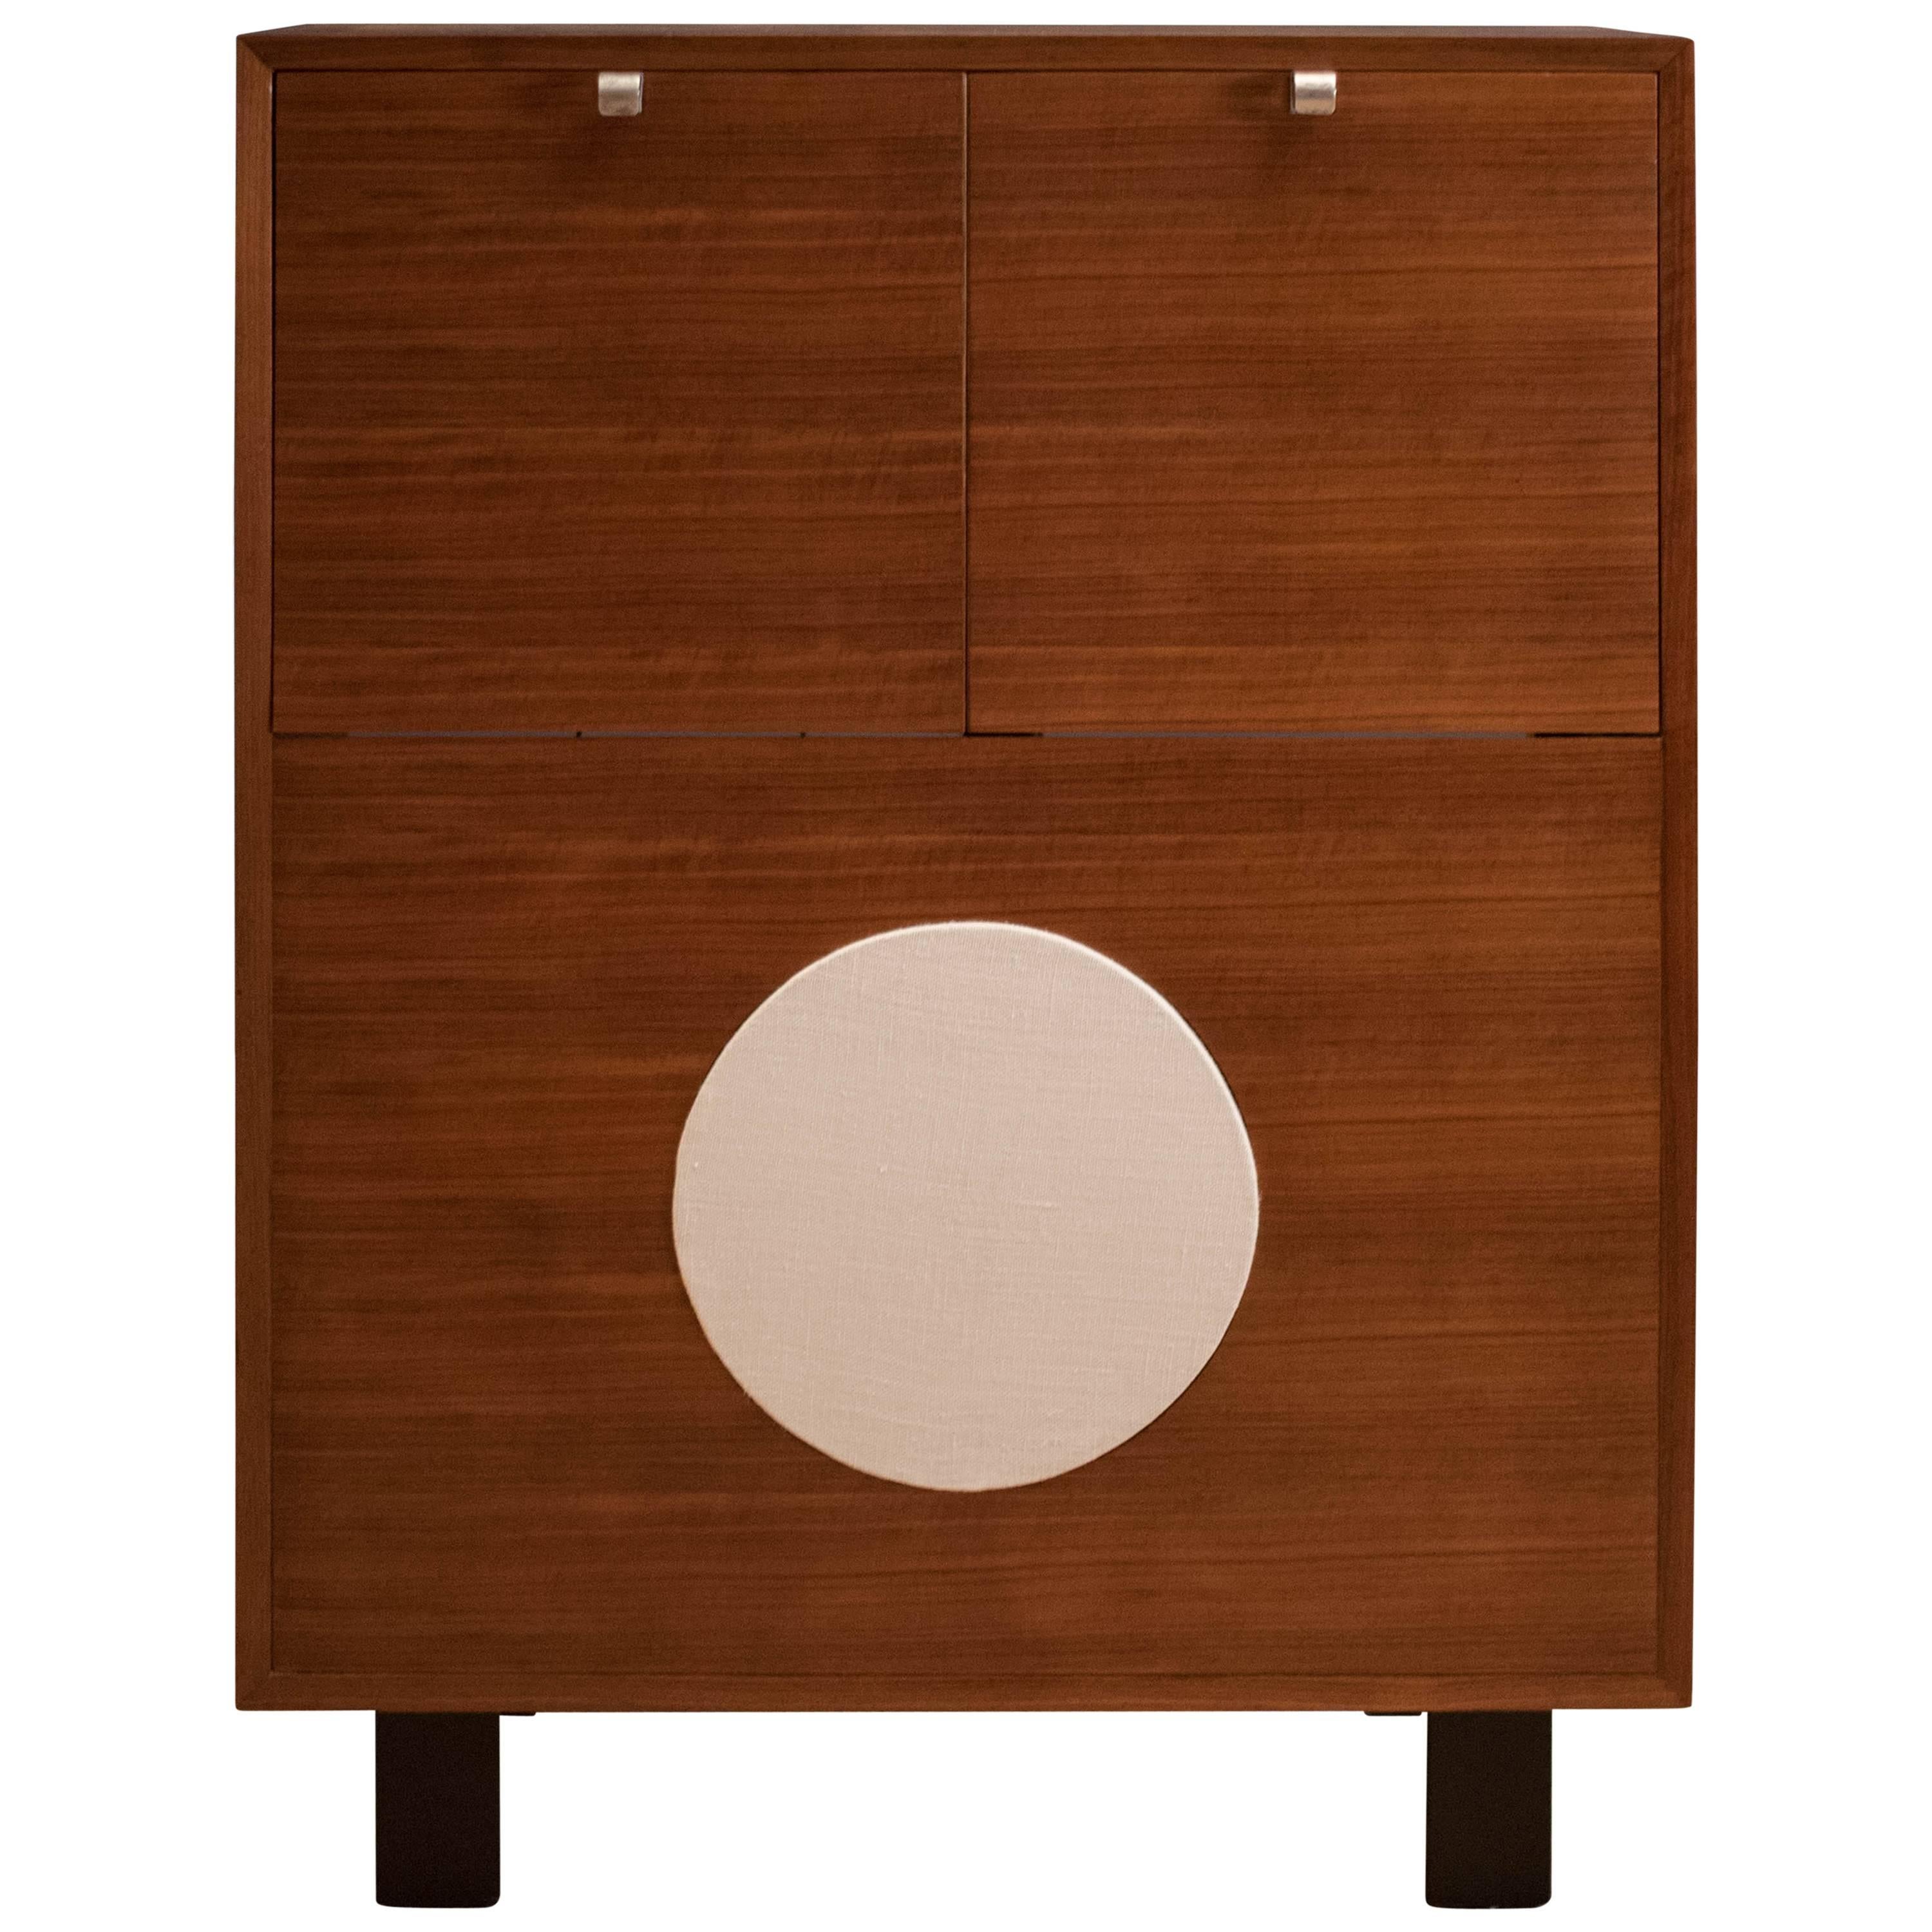 George Nelson Primavera Record Cabinet for Herman Miller